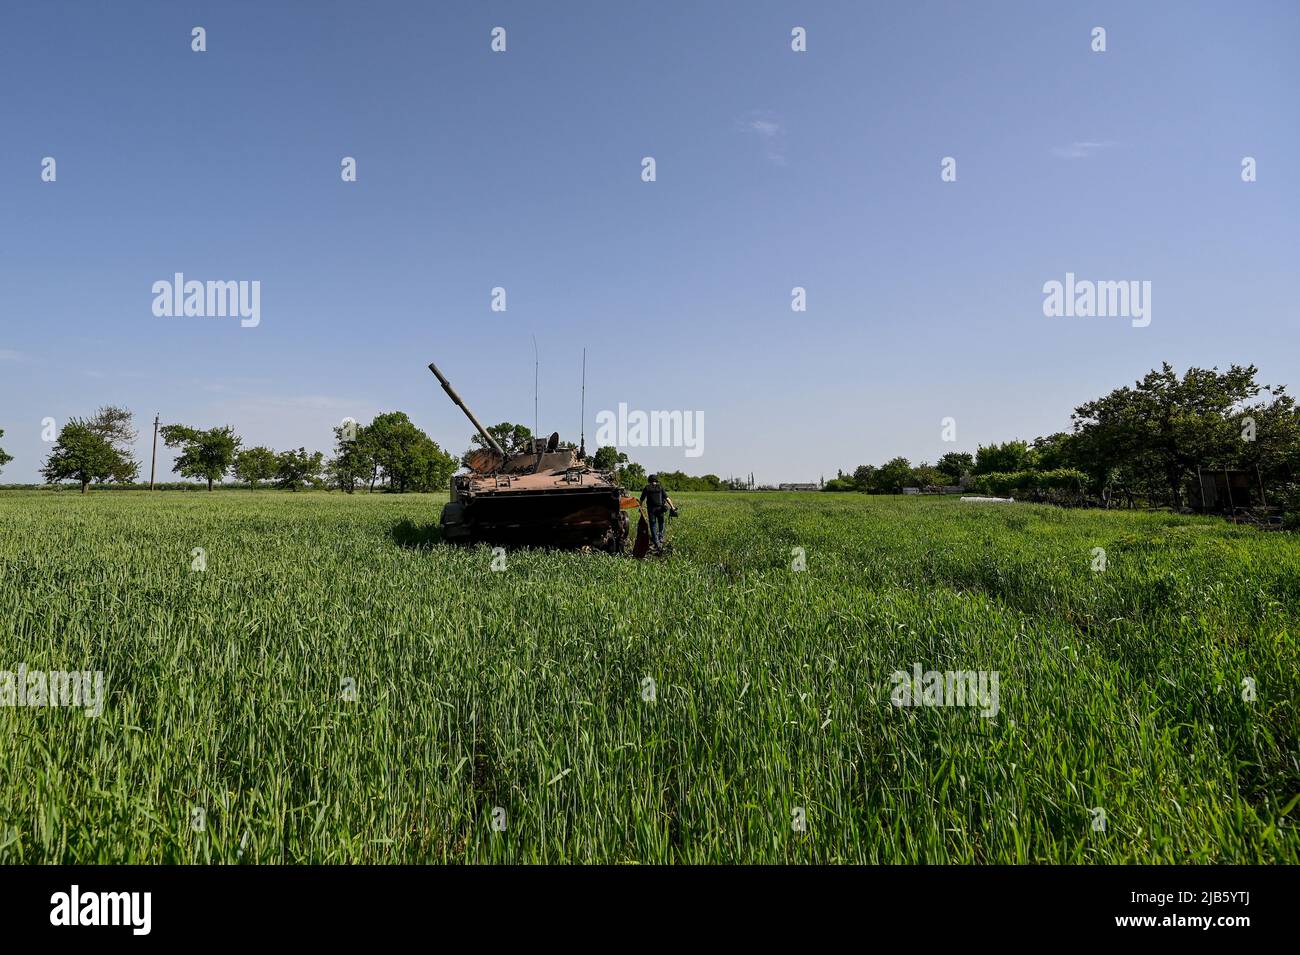 A destroyed Russian military vehicle is pictured in a green field in Novopil, a village liberated from Russian invaders, Donetsk Region, eastern Ukraine, May 31, 2022. Photo by Dmytro Smoliyenko/Ukrinform/ABACAPRESS.COM Stock Photo